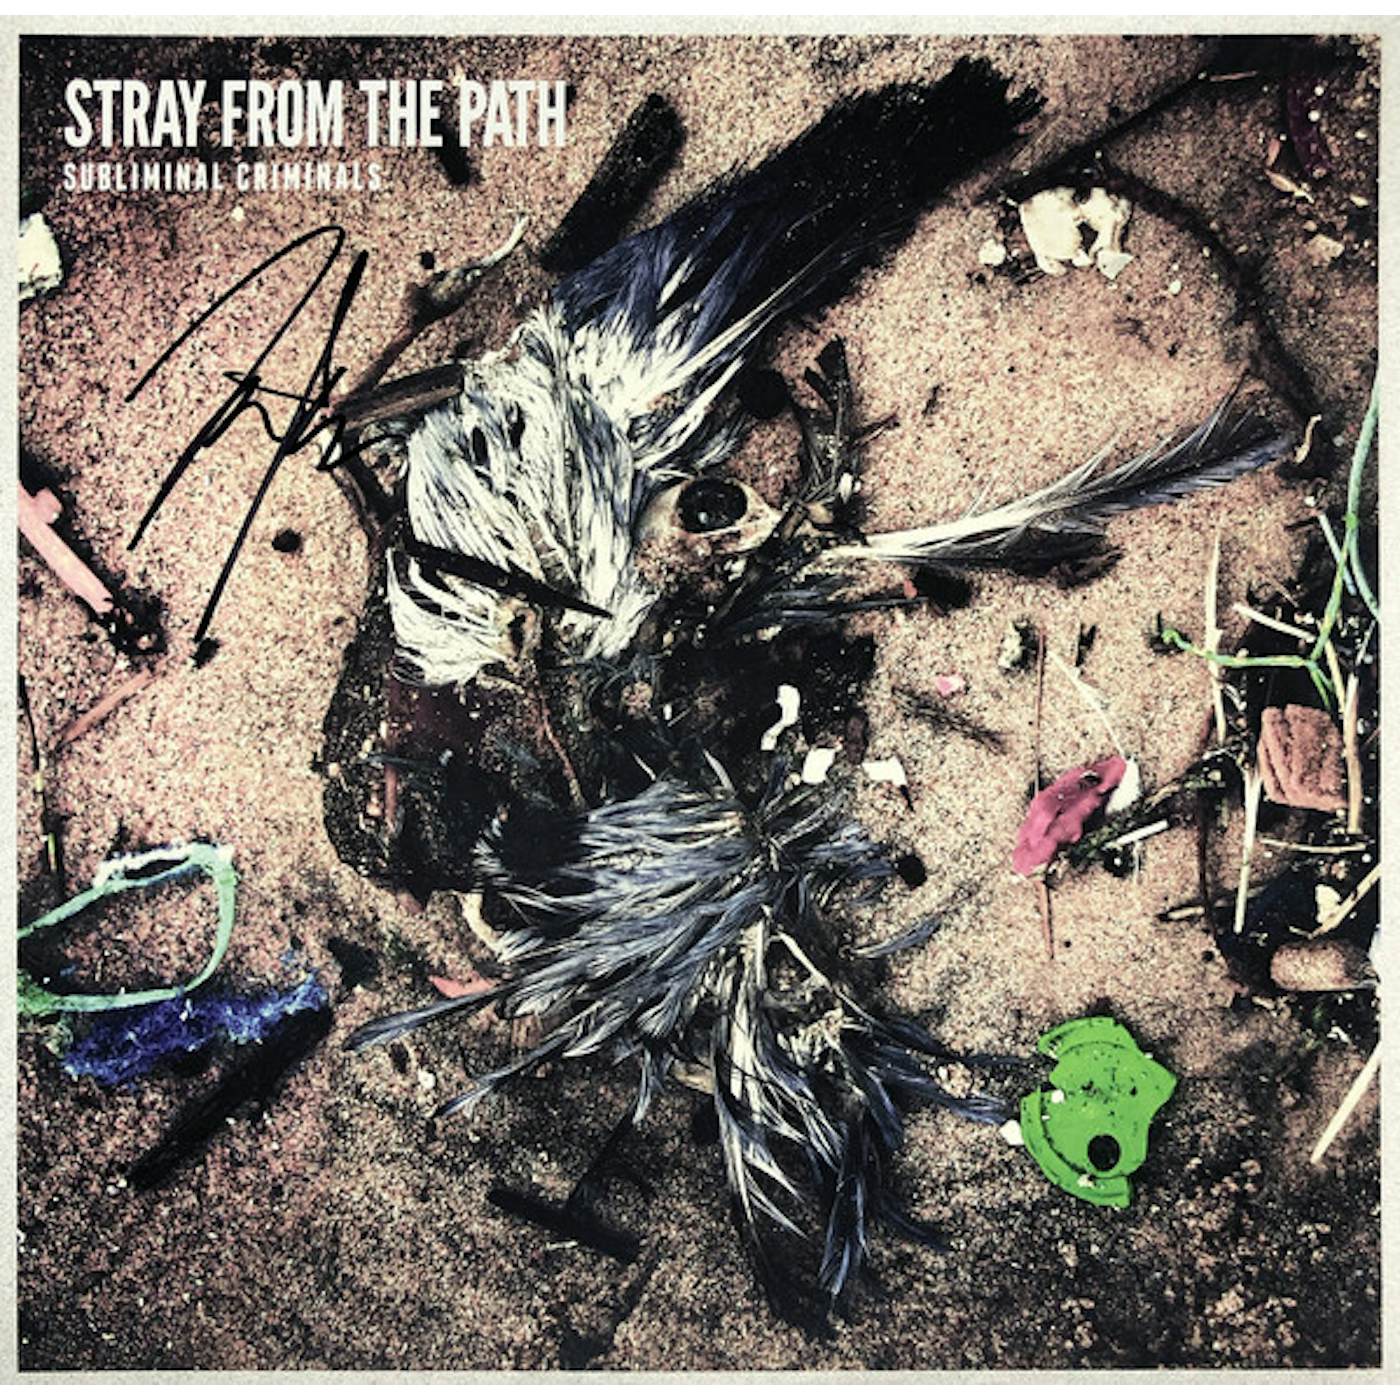 Stray From The Path Subliminal Criminals Vinyl Record